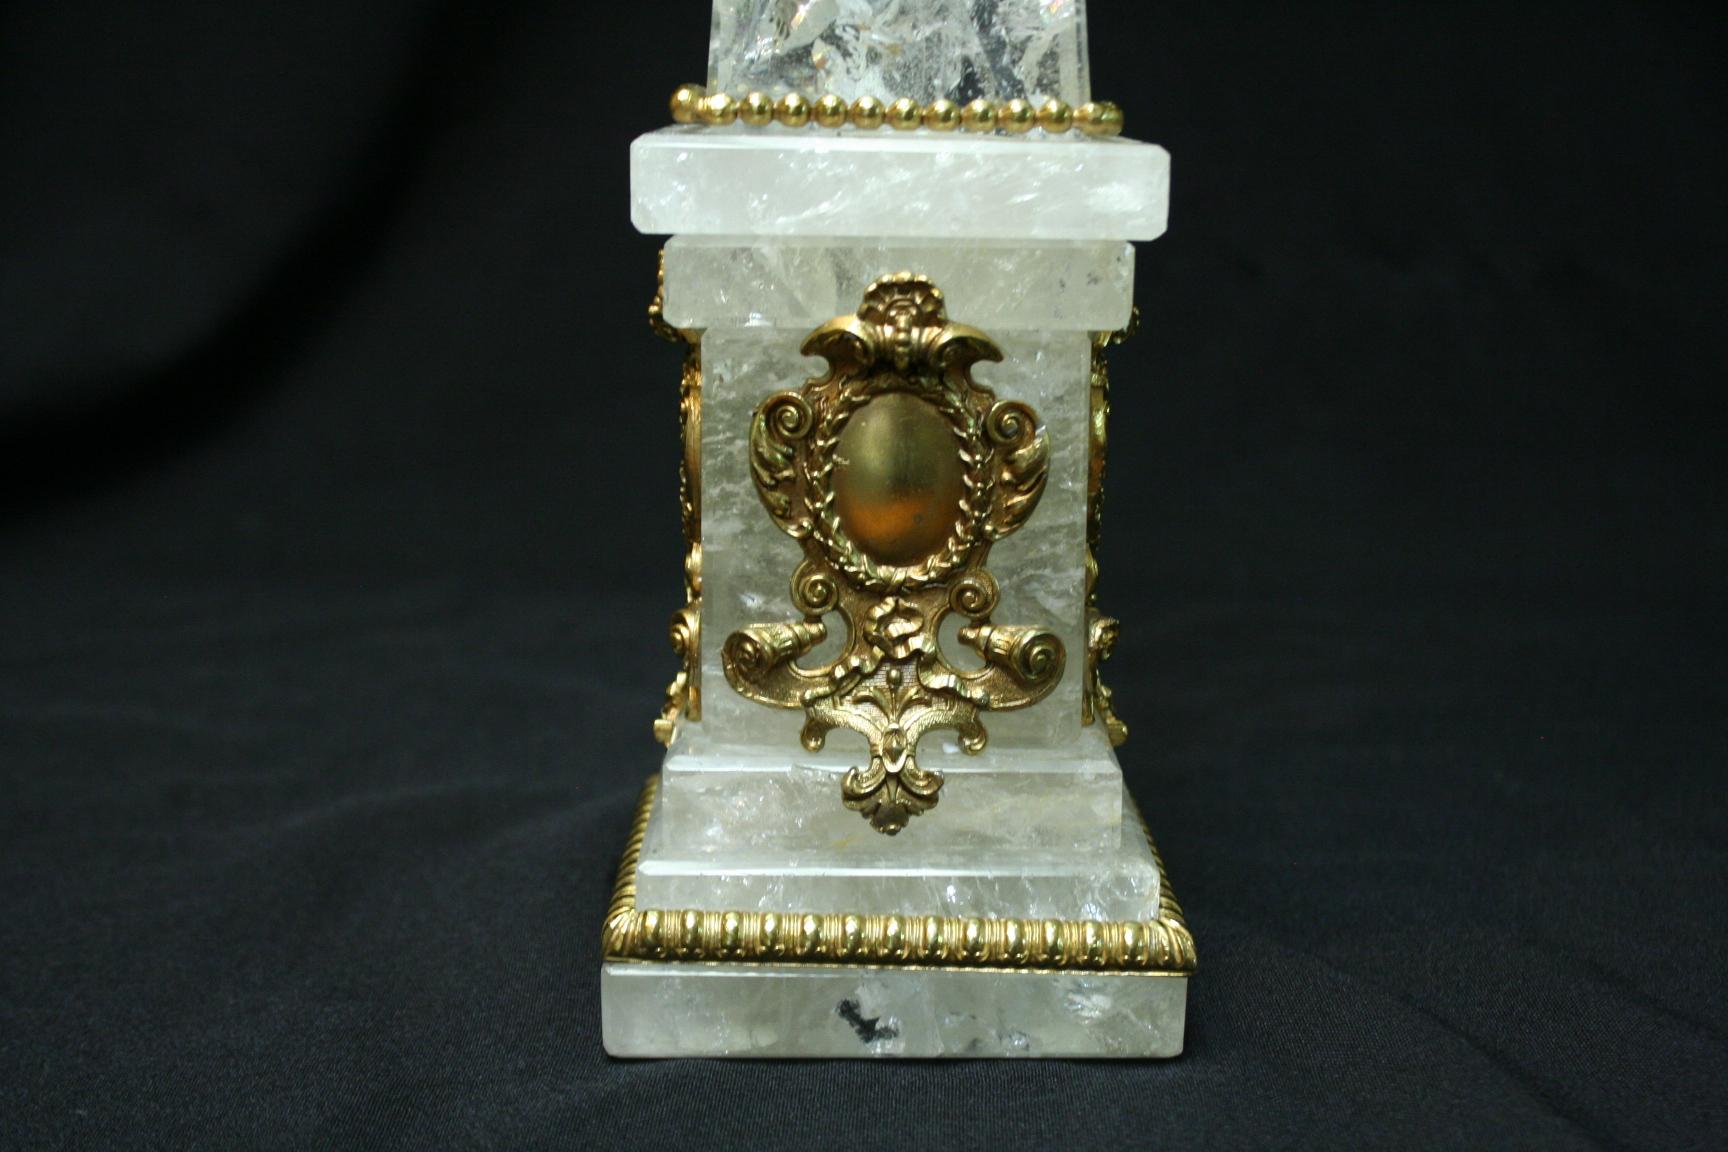 Pair of neoclassical hand carved and hand polished ormolu-mounted good quality rock crystal obelisks.